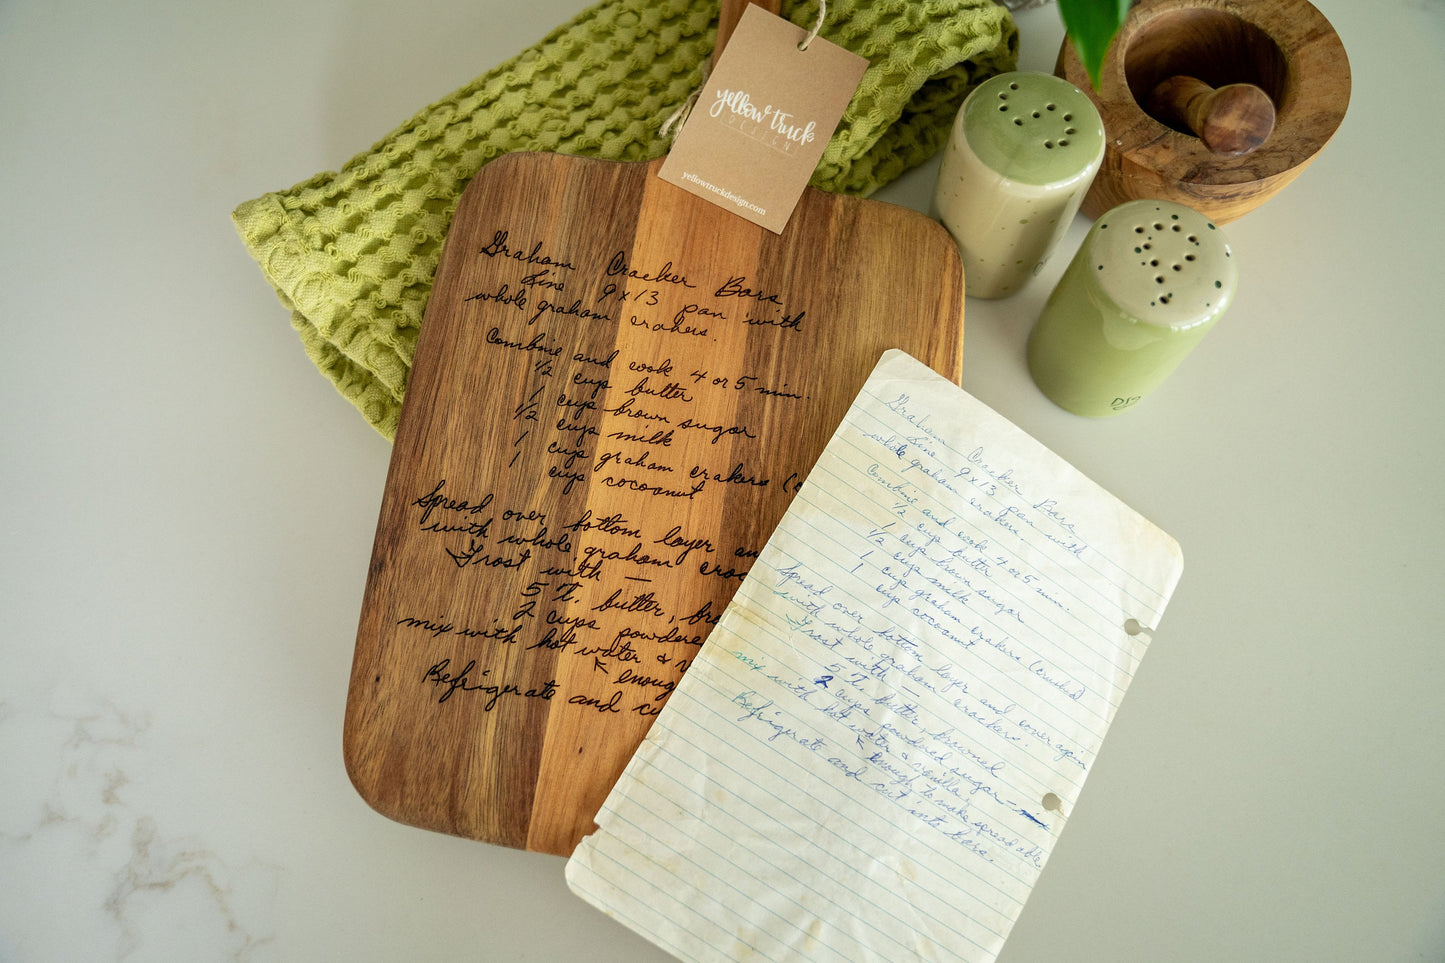 Personalized Square Cutting Board with Handwritten Recipe | Cutting Board With Recipe Gift | Custom Cutting Board Mother's day